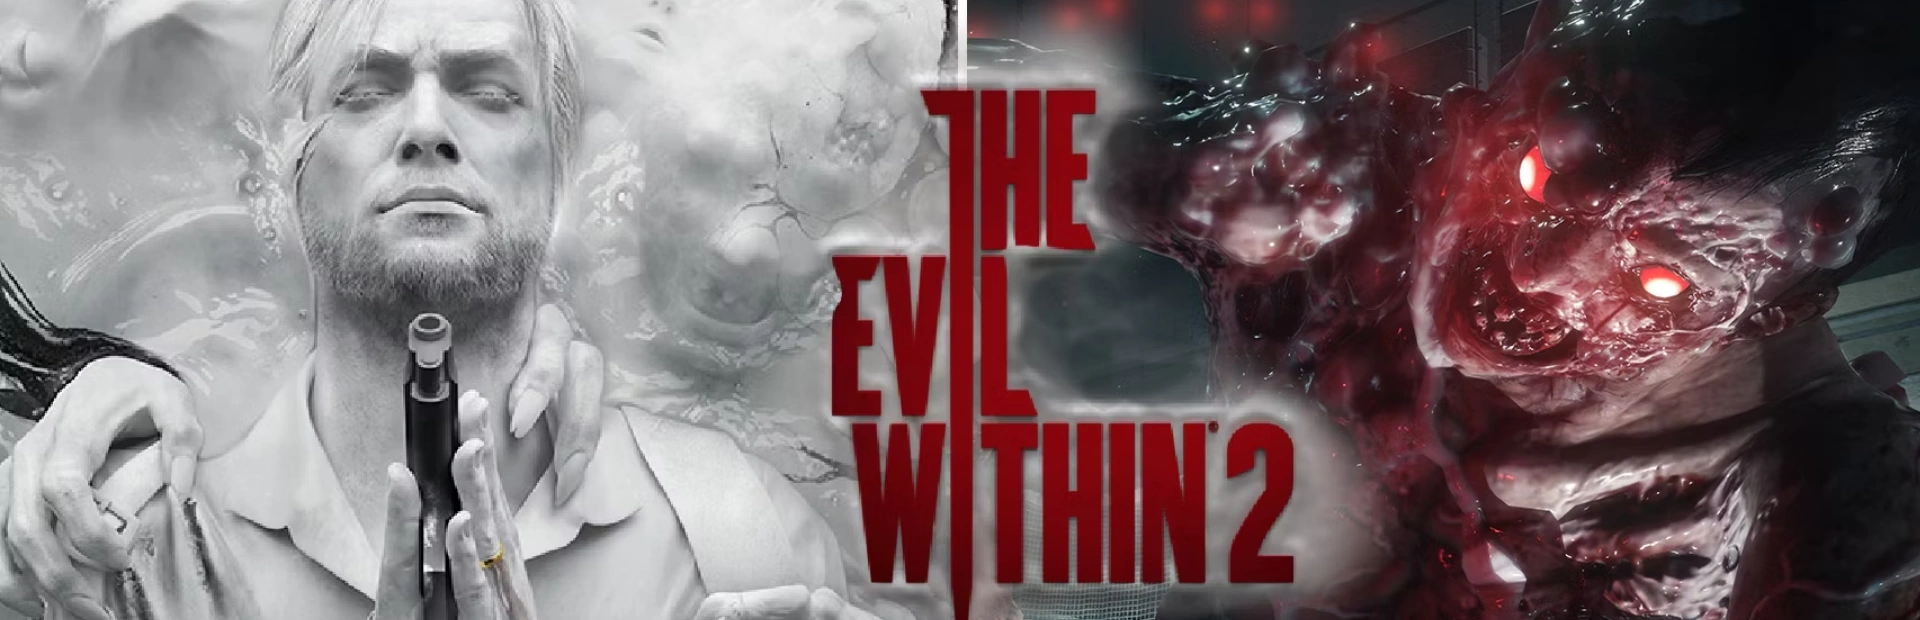 The Evil Within 2.banner1